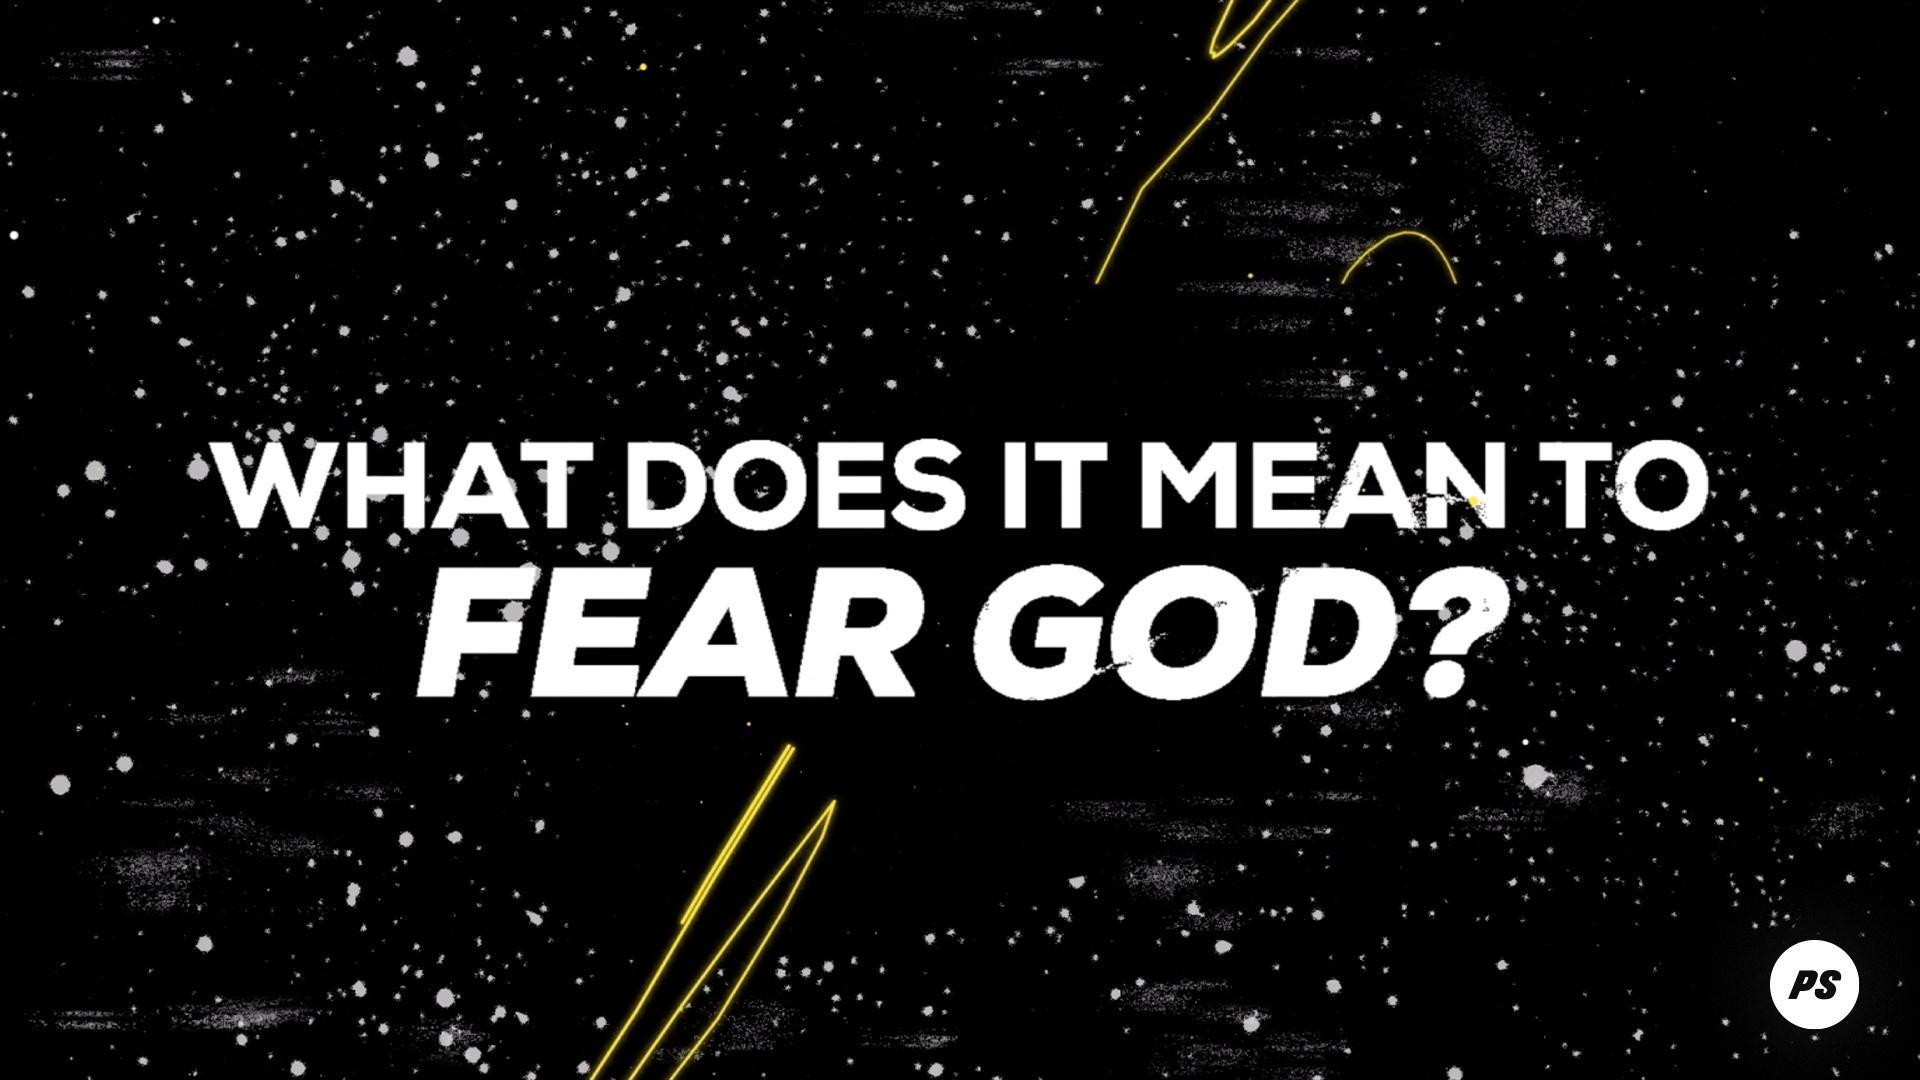 Featured Image for “What Does It Mean to Fear God?”